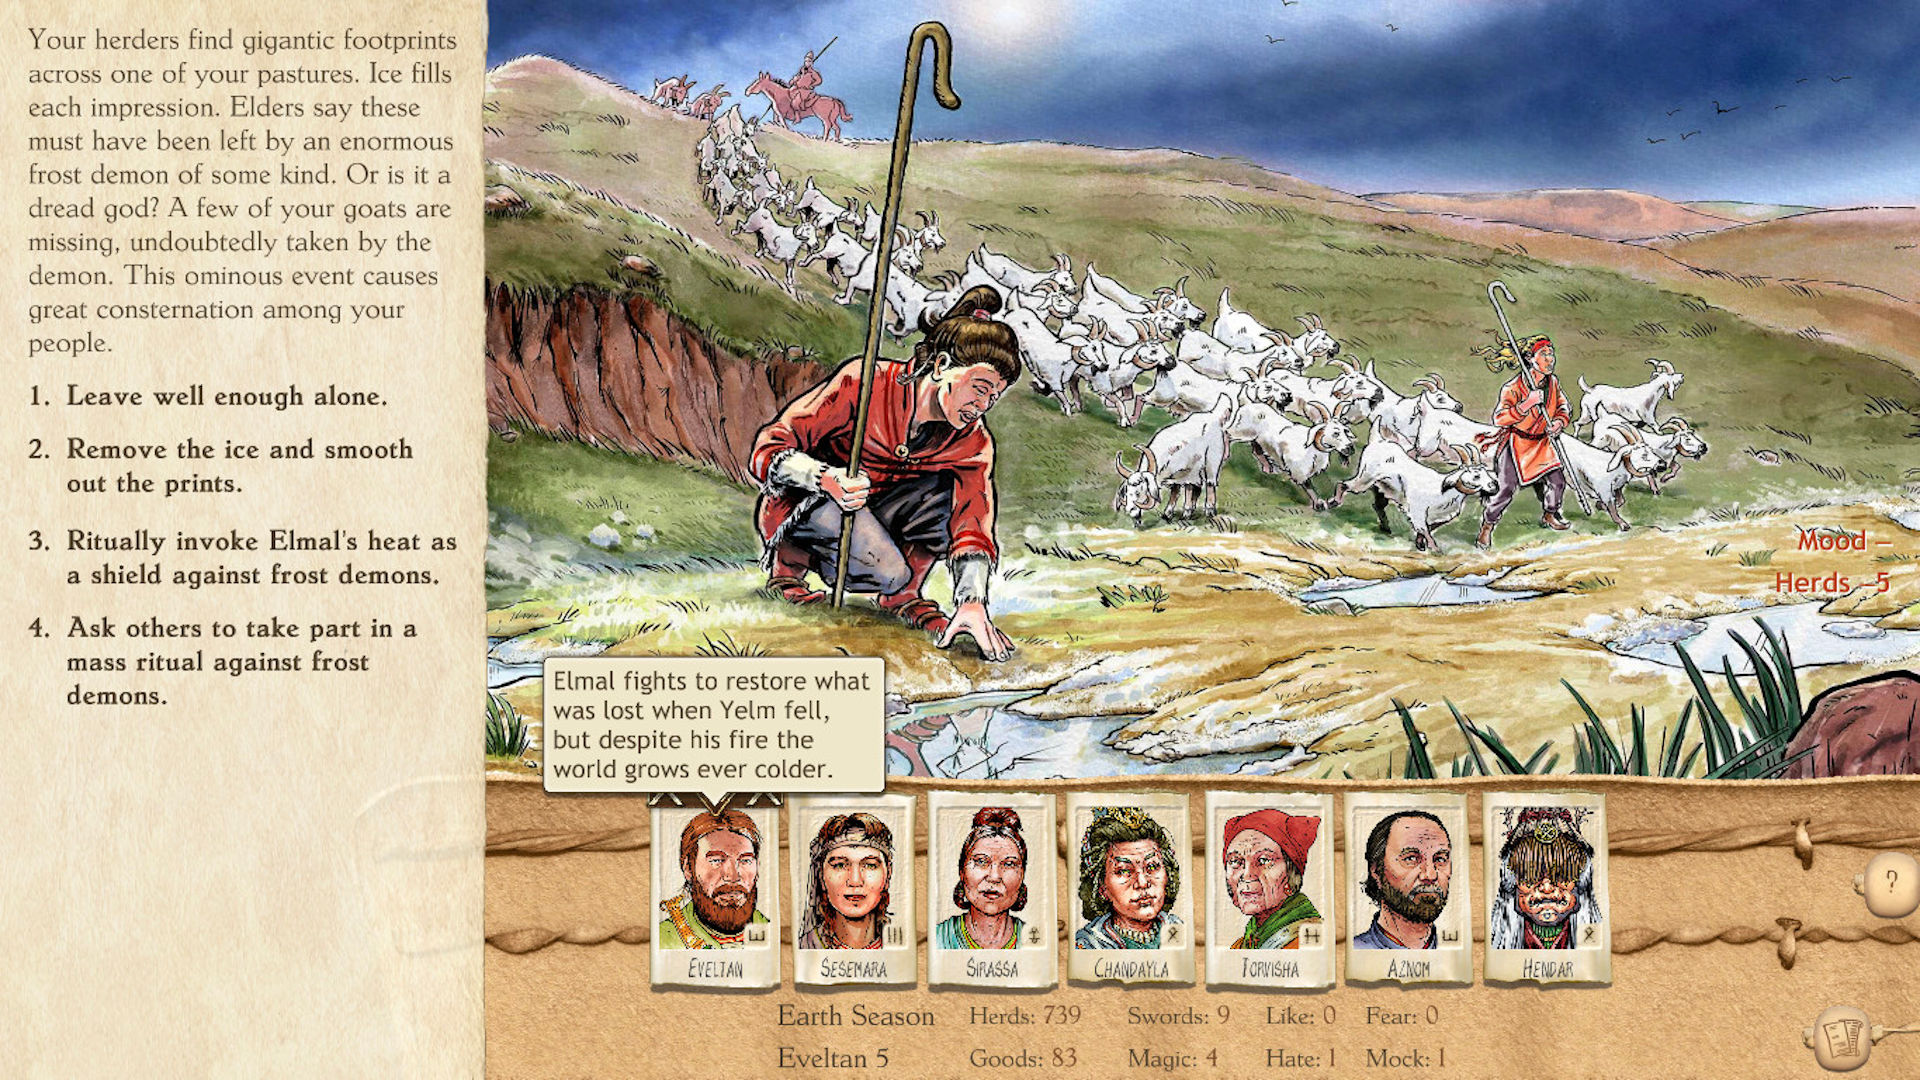 Best mobile strategy games: Six Ages: Ride Like the Wind. Image shows shepherds guiding sheep along.